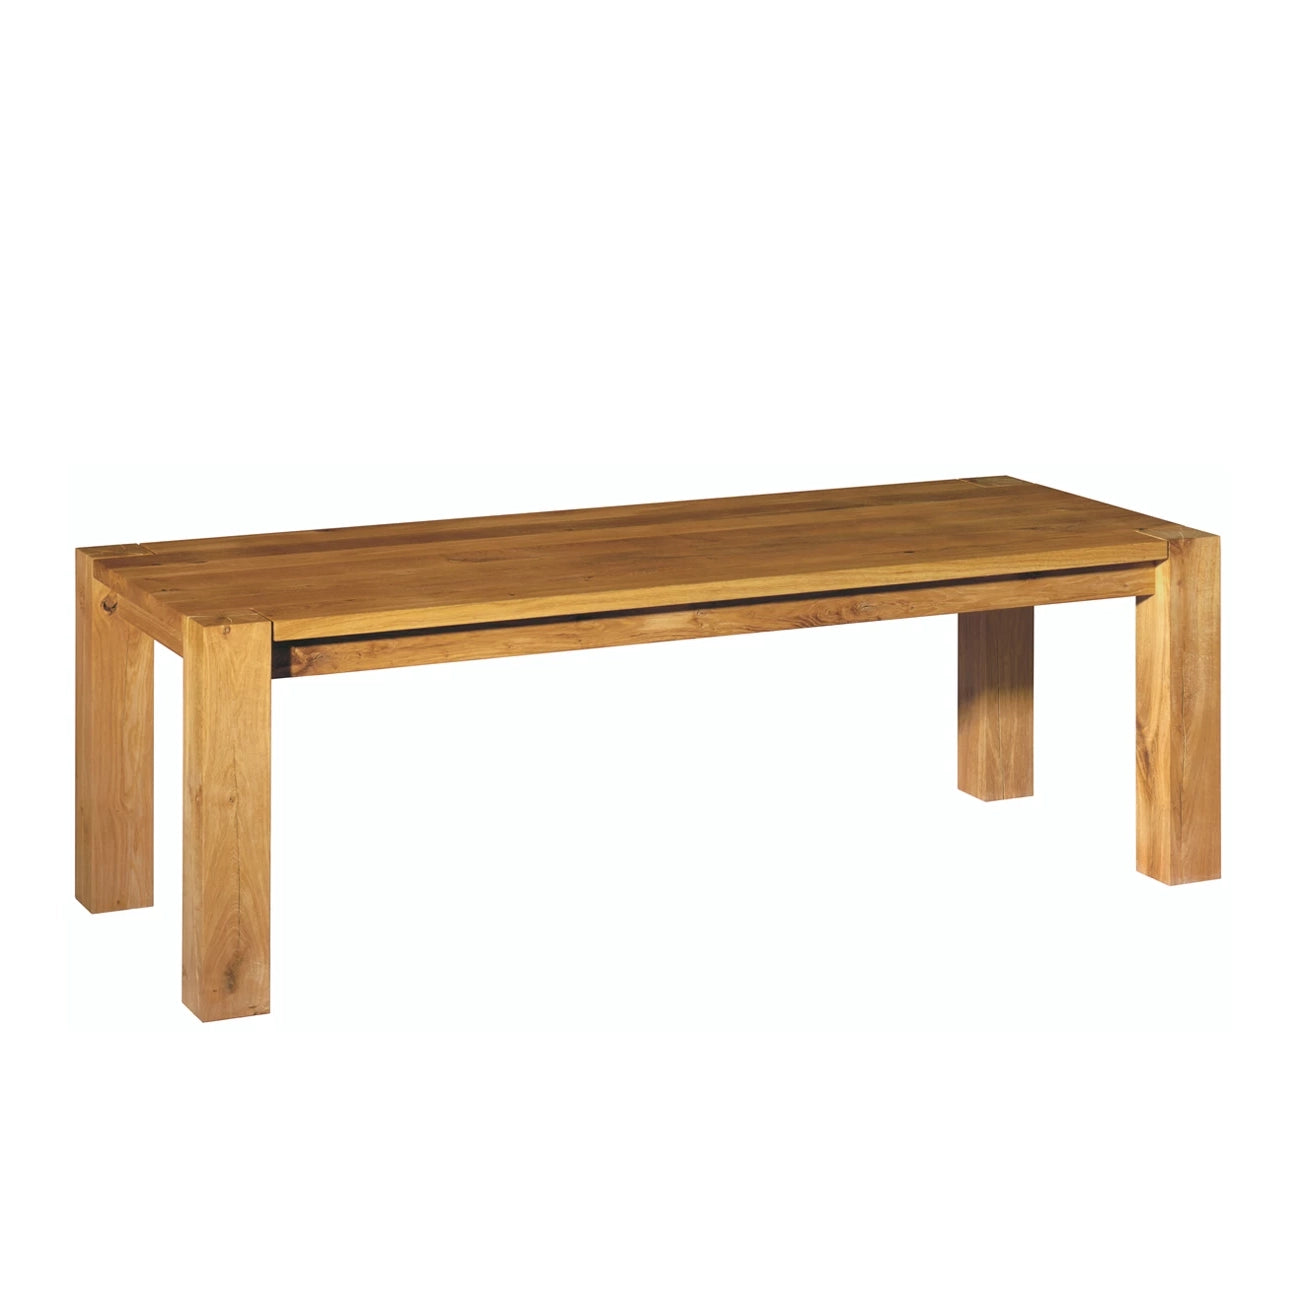 PONTE  Table Solid wood office desk / table By e15